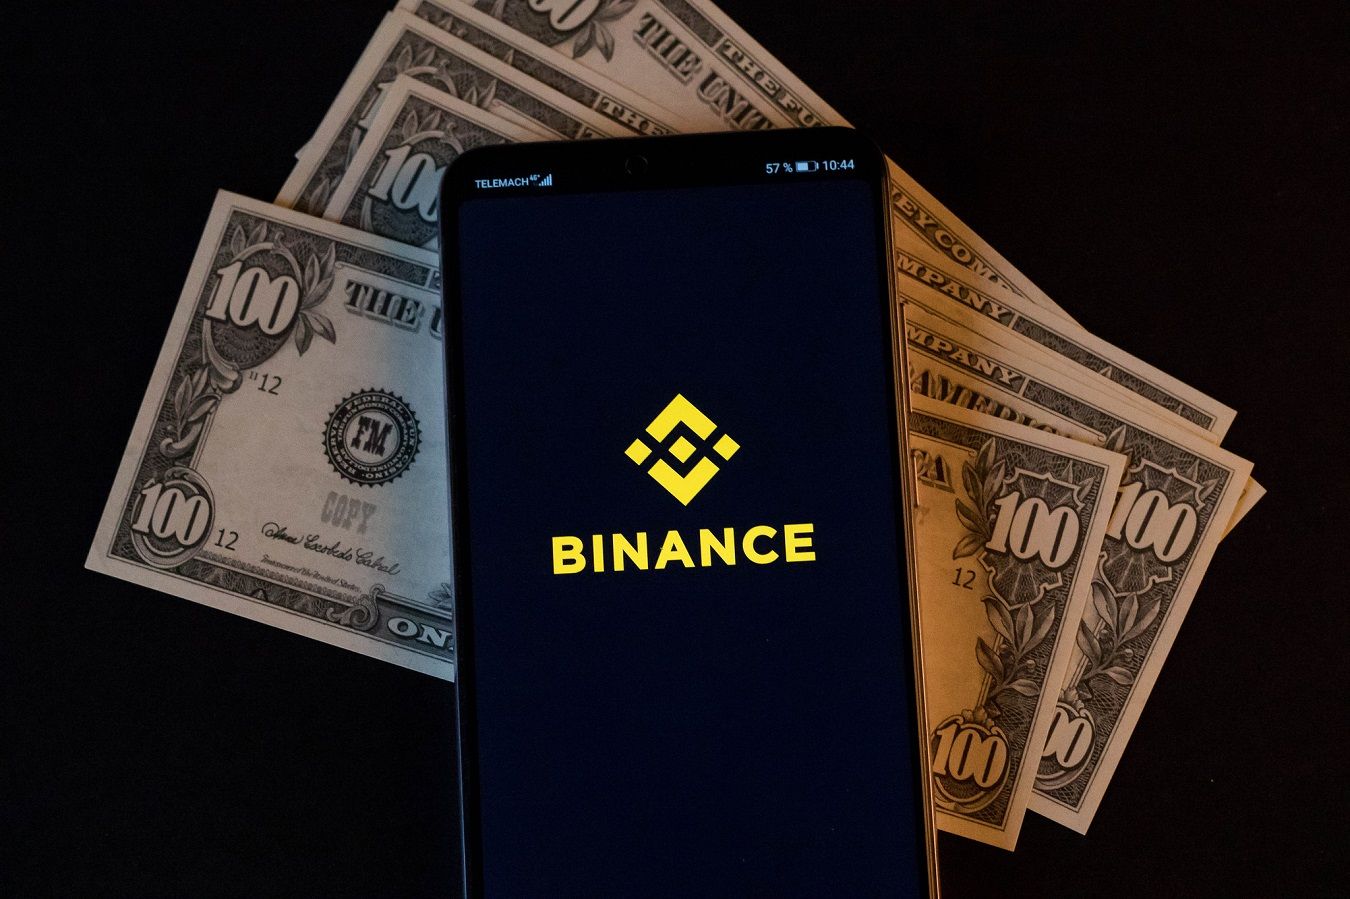 Binance users demand to return the money after software malfunction and crypto crash